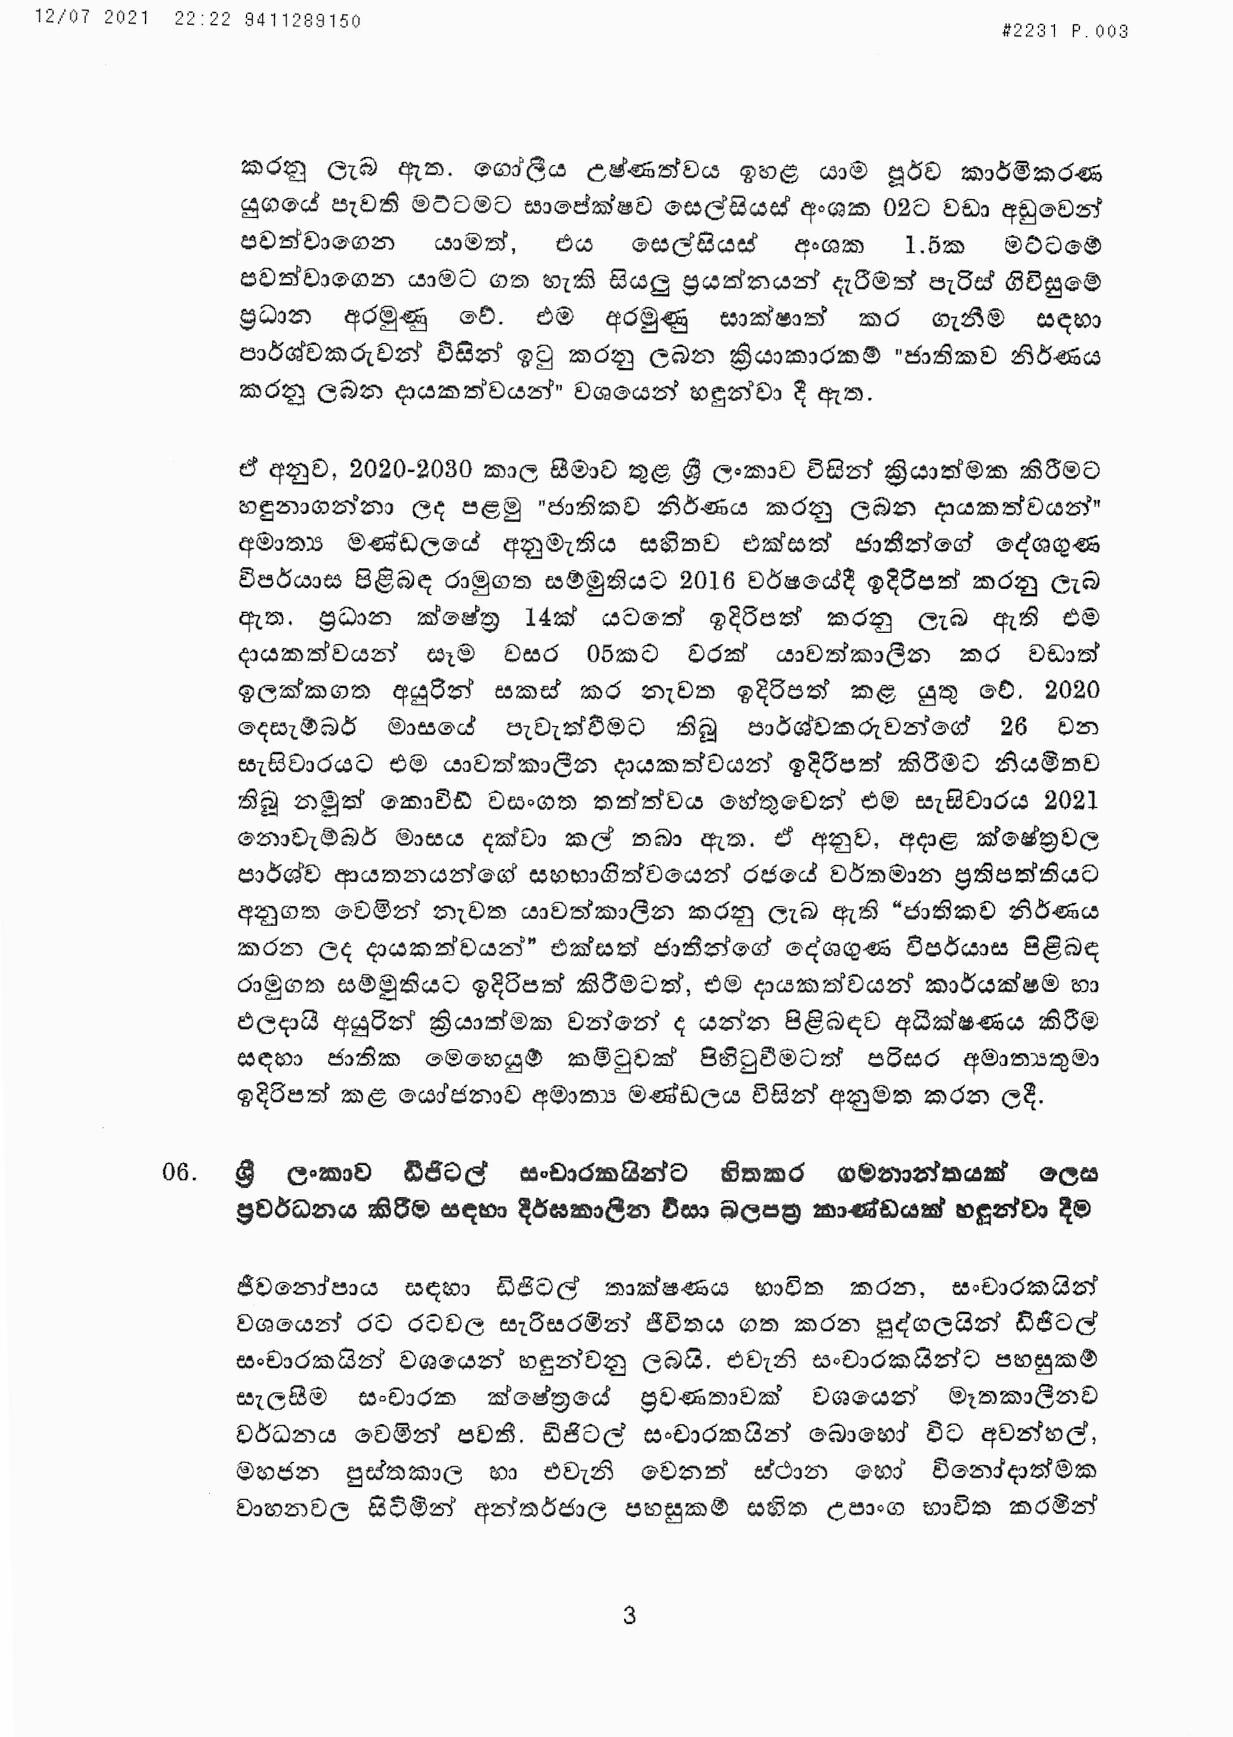 Cabinet Decision on 12.07.2021 page 001